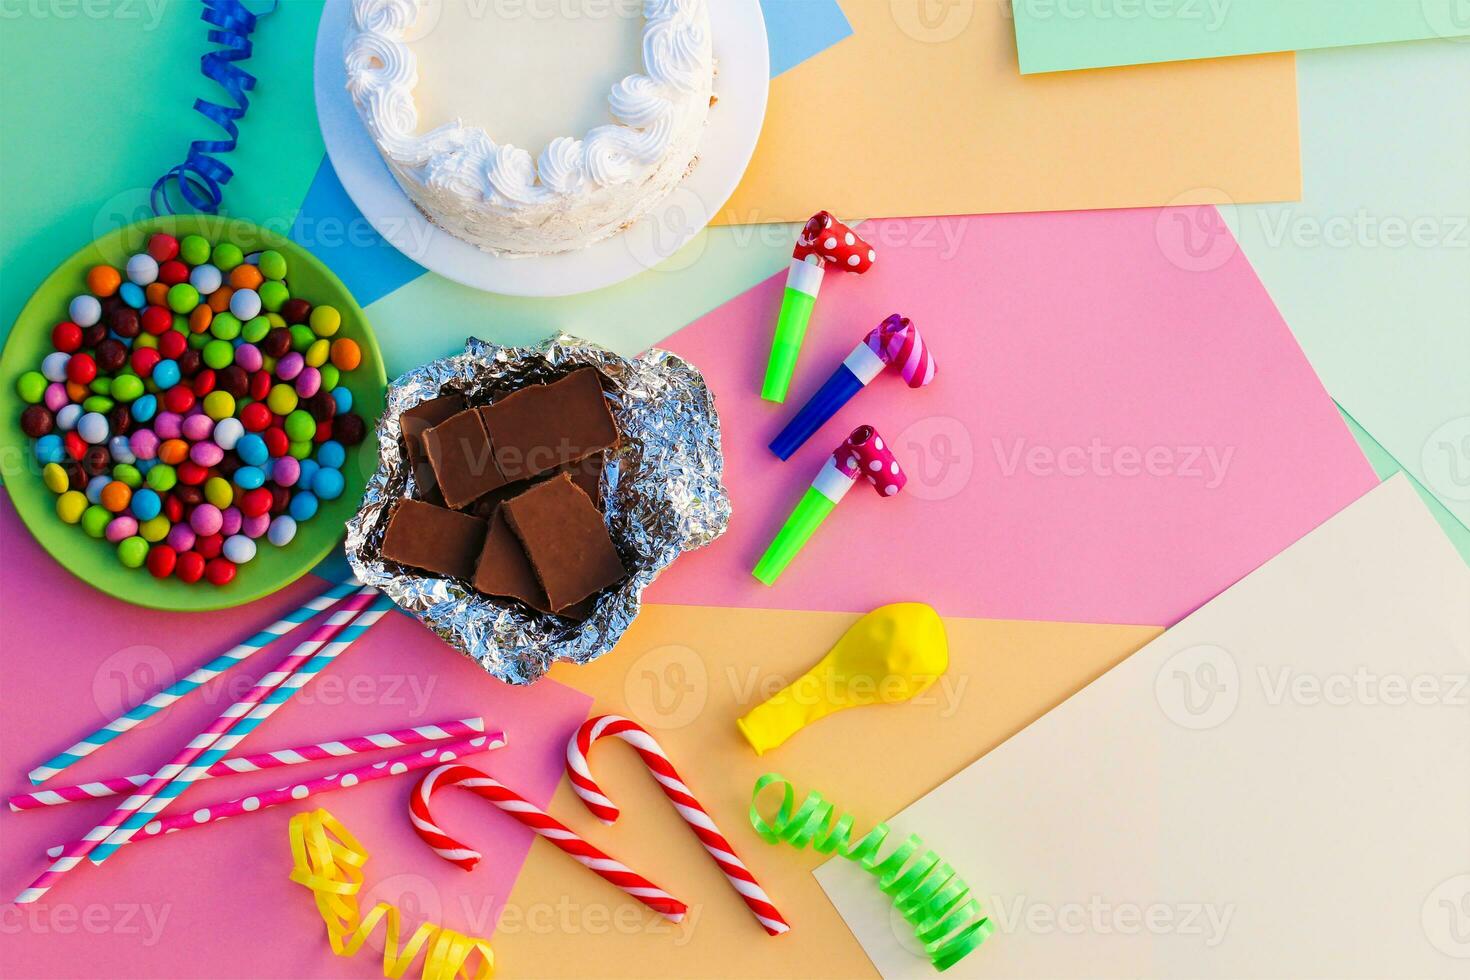 Cake, candy, chocolate, whistles, streamers, balloons on holiday table. Concept of children's birthday party. View top. photo